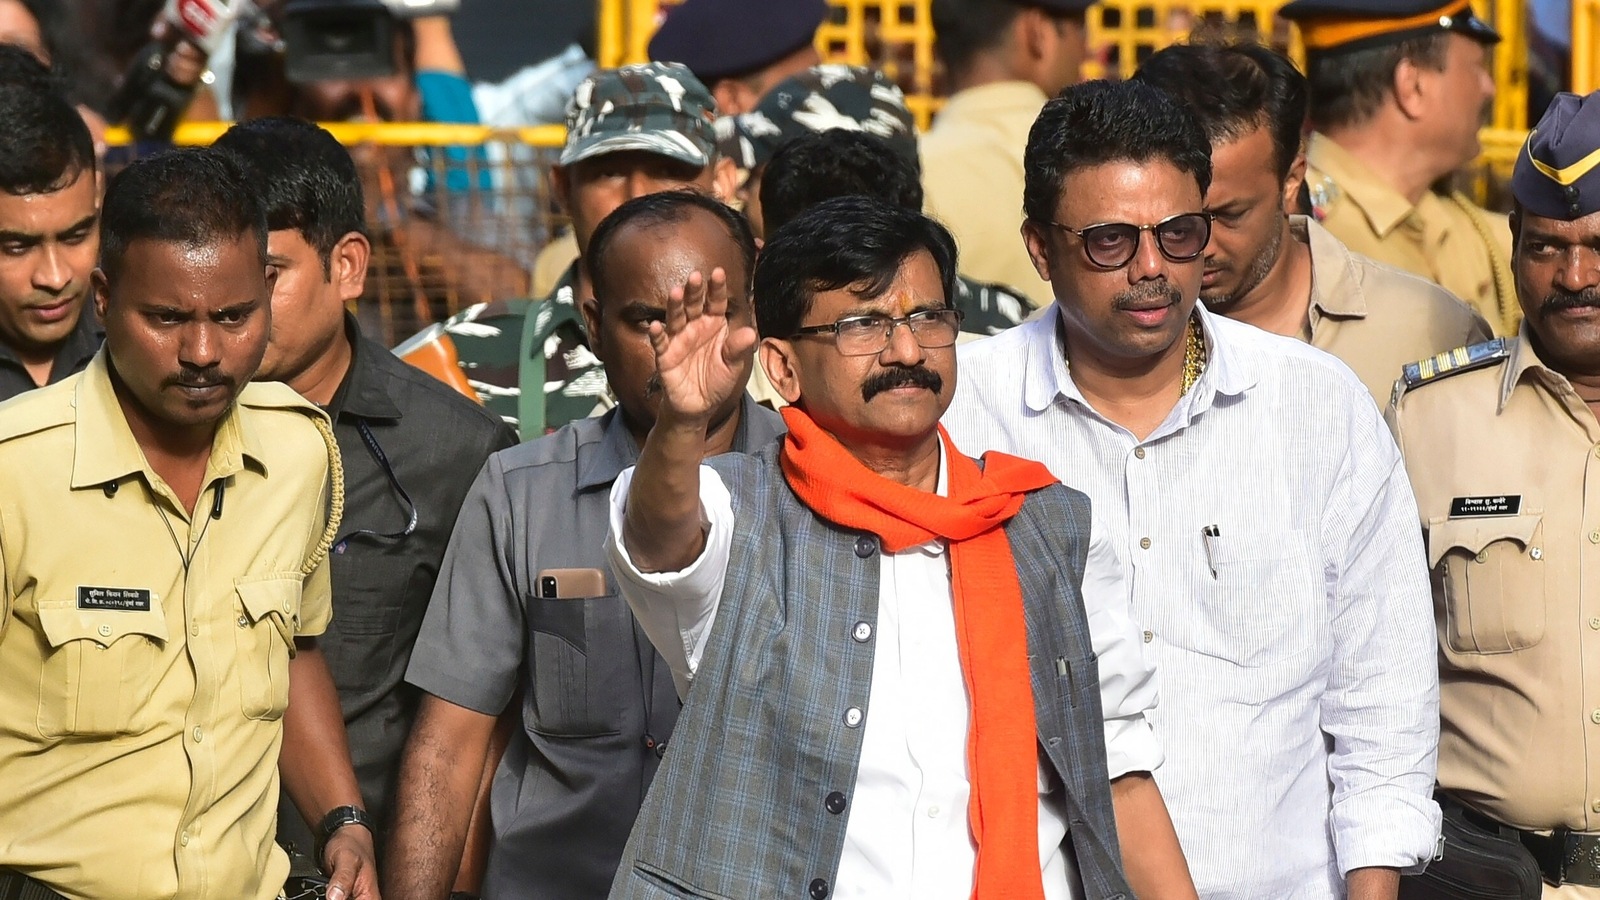 Why Sena's Sanjay Raut was arrested, according to ED officials | Latest News India - Hindustan Times